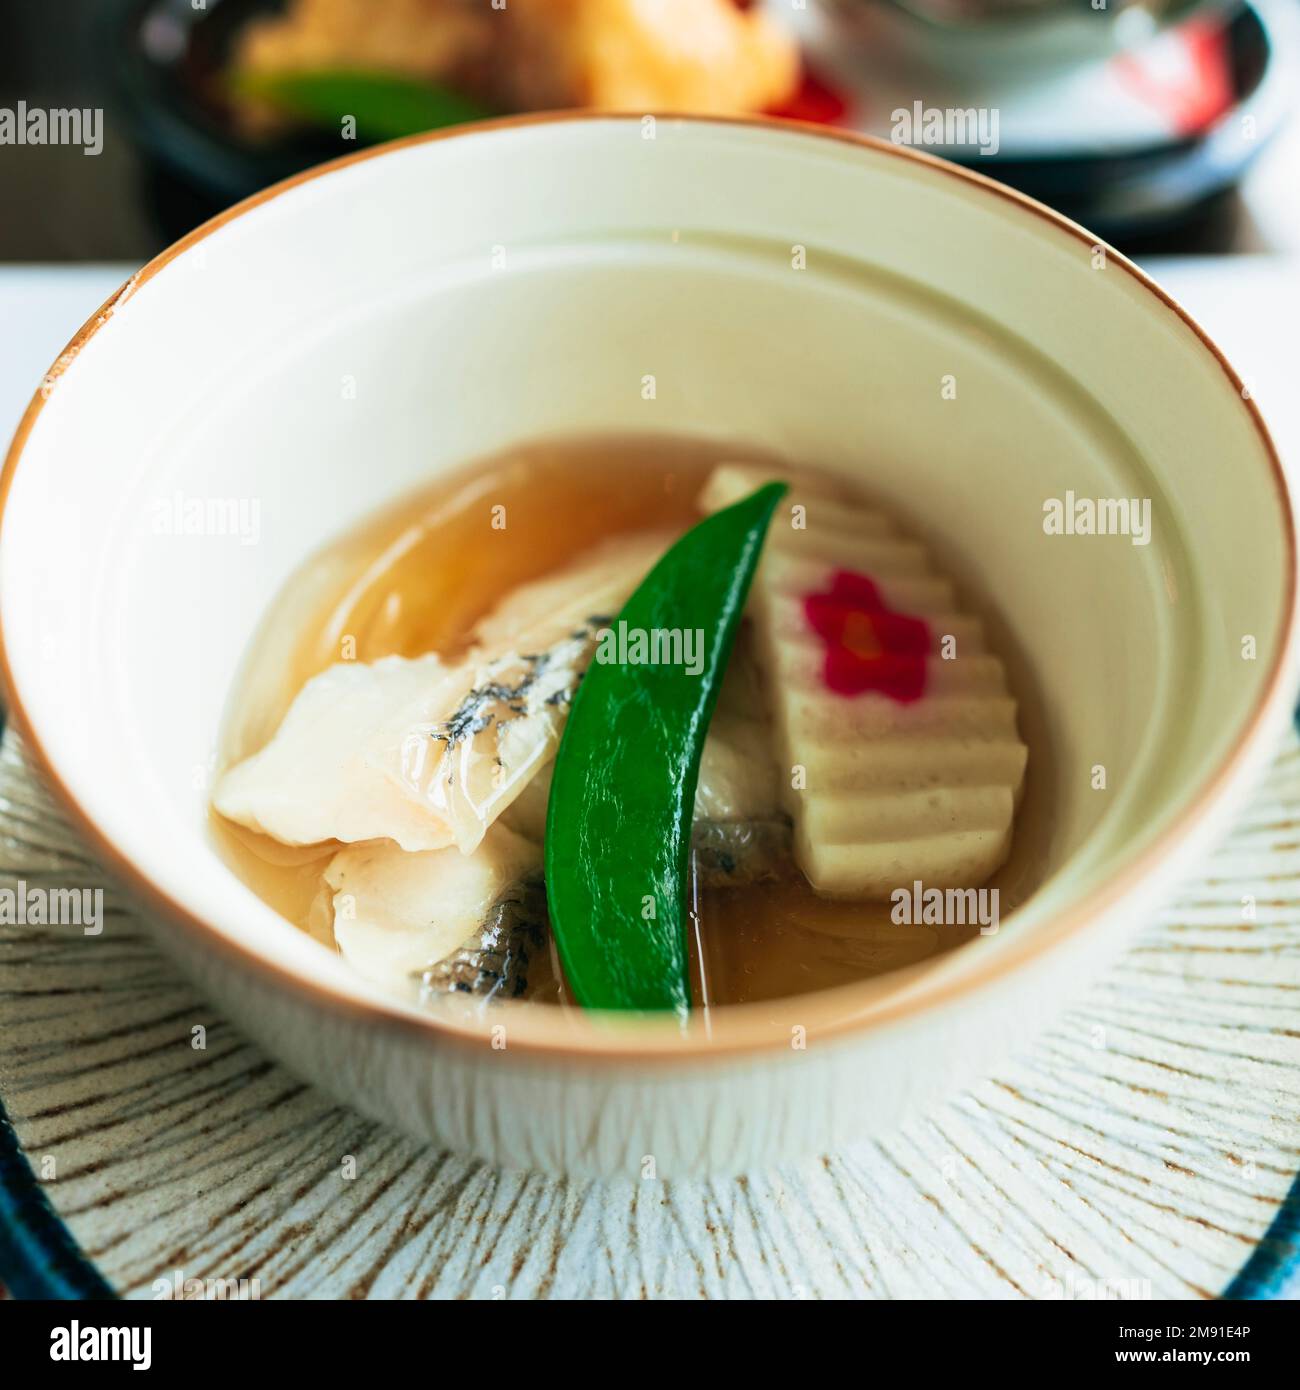 Fish soup as an appetiser Stock Photo